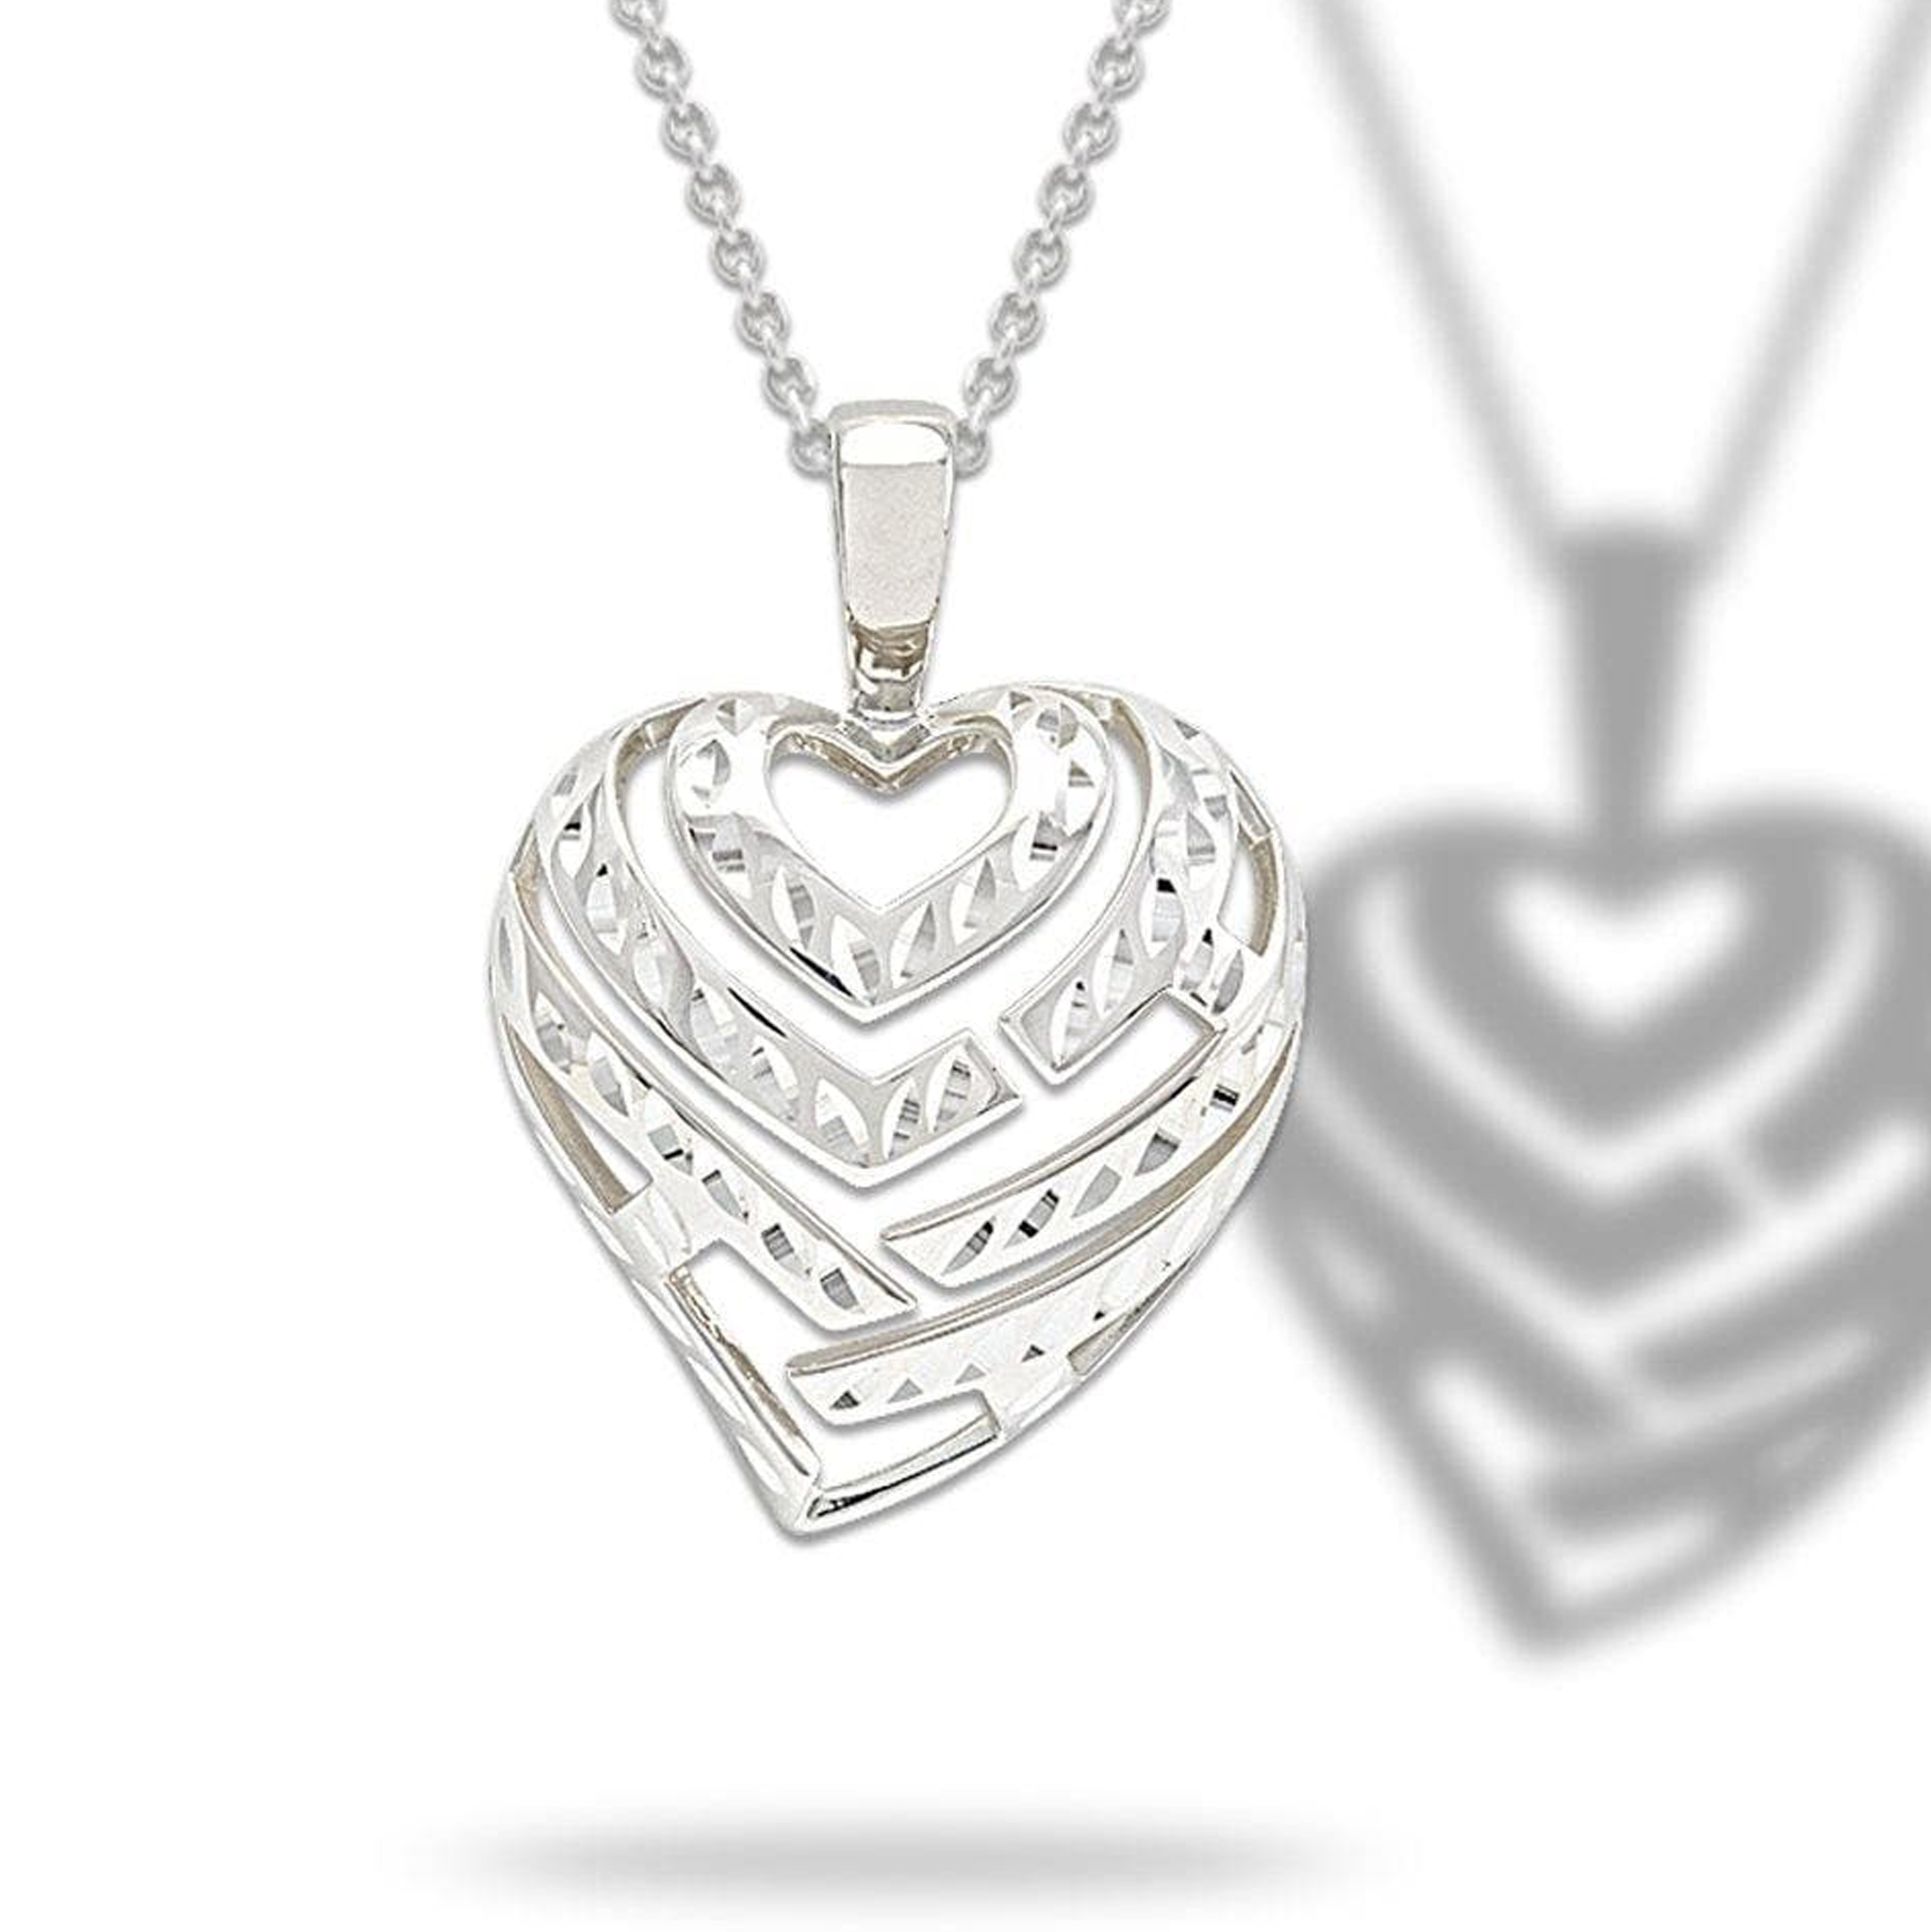 24" Adjustable Aloha Heart Necklace in Sterling Silver - 30mm